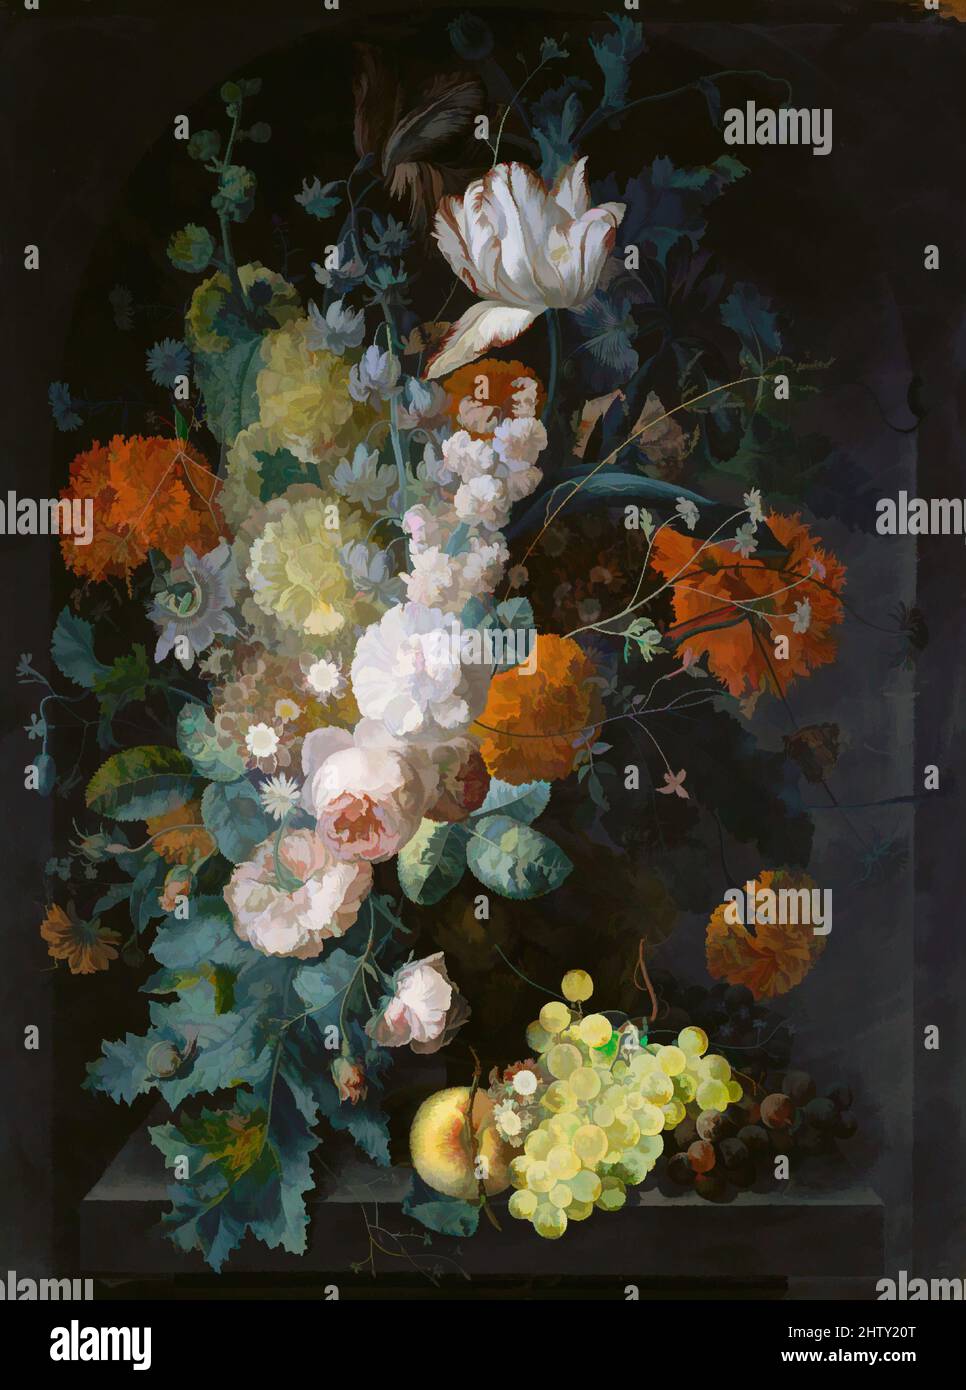 Art inspired by A Vase of Flowers, 1716, Oil on wood, 31 1/4 x 23 3/4 in. (79.4 x 60.3 cm), Paintings, Margareta Haverman (Dutch, active by 1716–died 1722 or later), Several female artists of the Netherlands specialized in flower pictures, the best known being Rachel Ruysch (1664–1750, Classic works modernized by Artotop with a splash of modernity. Shapes, color and value, eye-catching visual impact on art. Emotions through freedom of artworks in a contemporary way. A timeless message pursuing a wildly creative new direction. Artists turning to the digital medium and creating the Artotop NFT Stock Photo